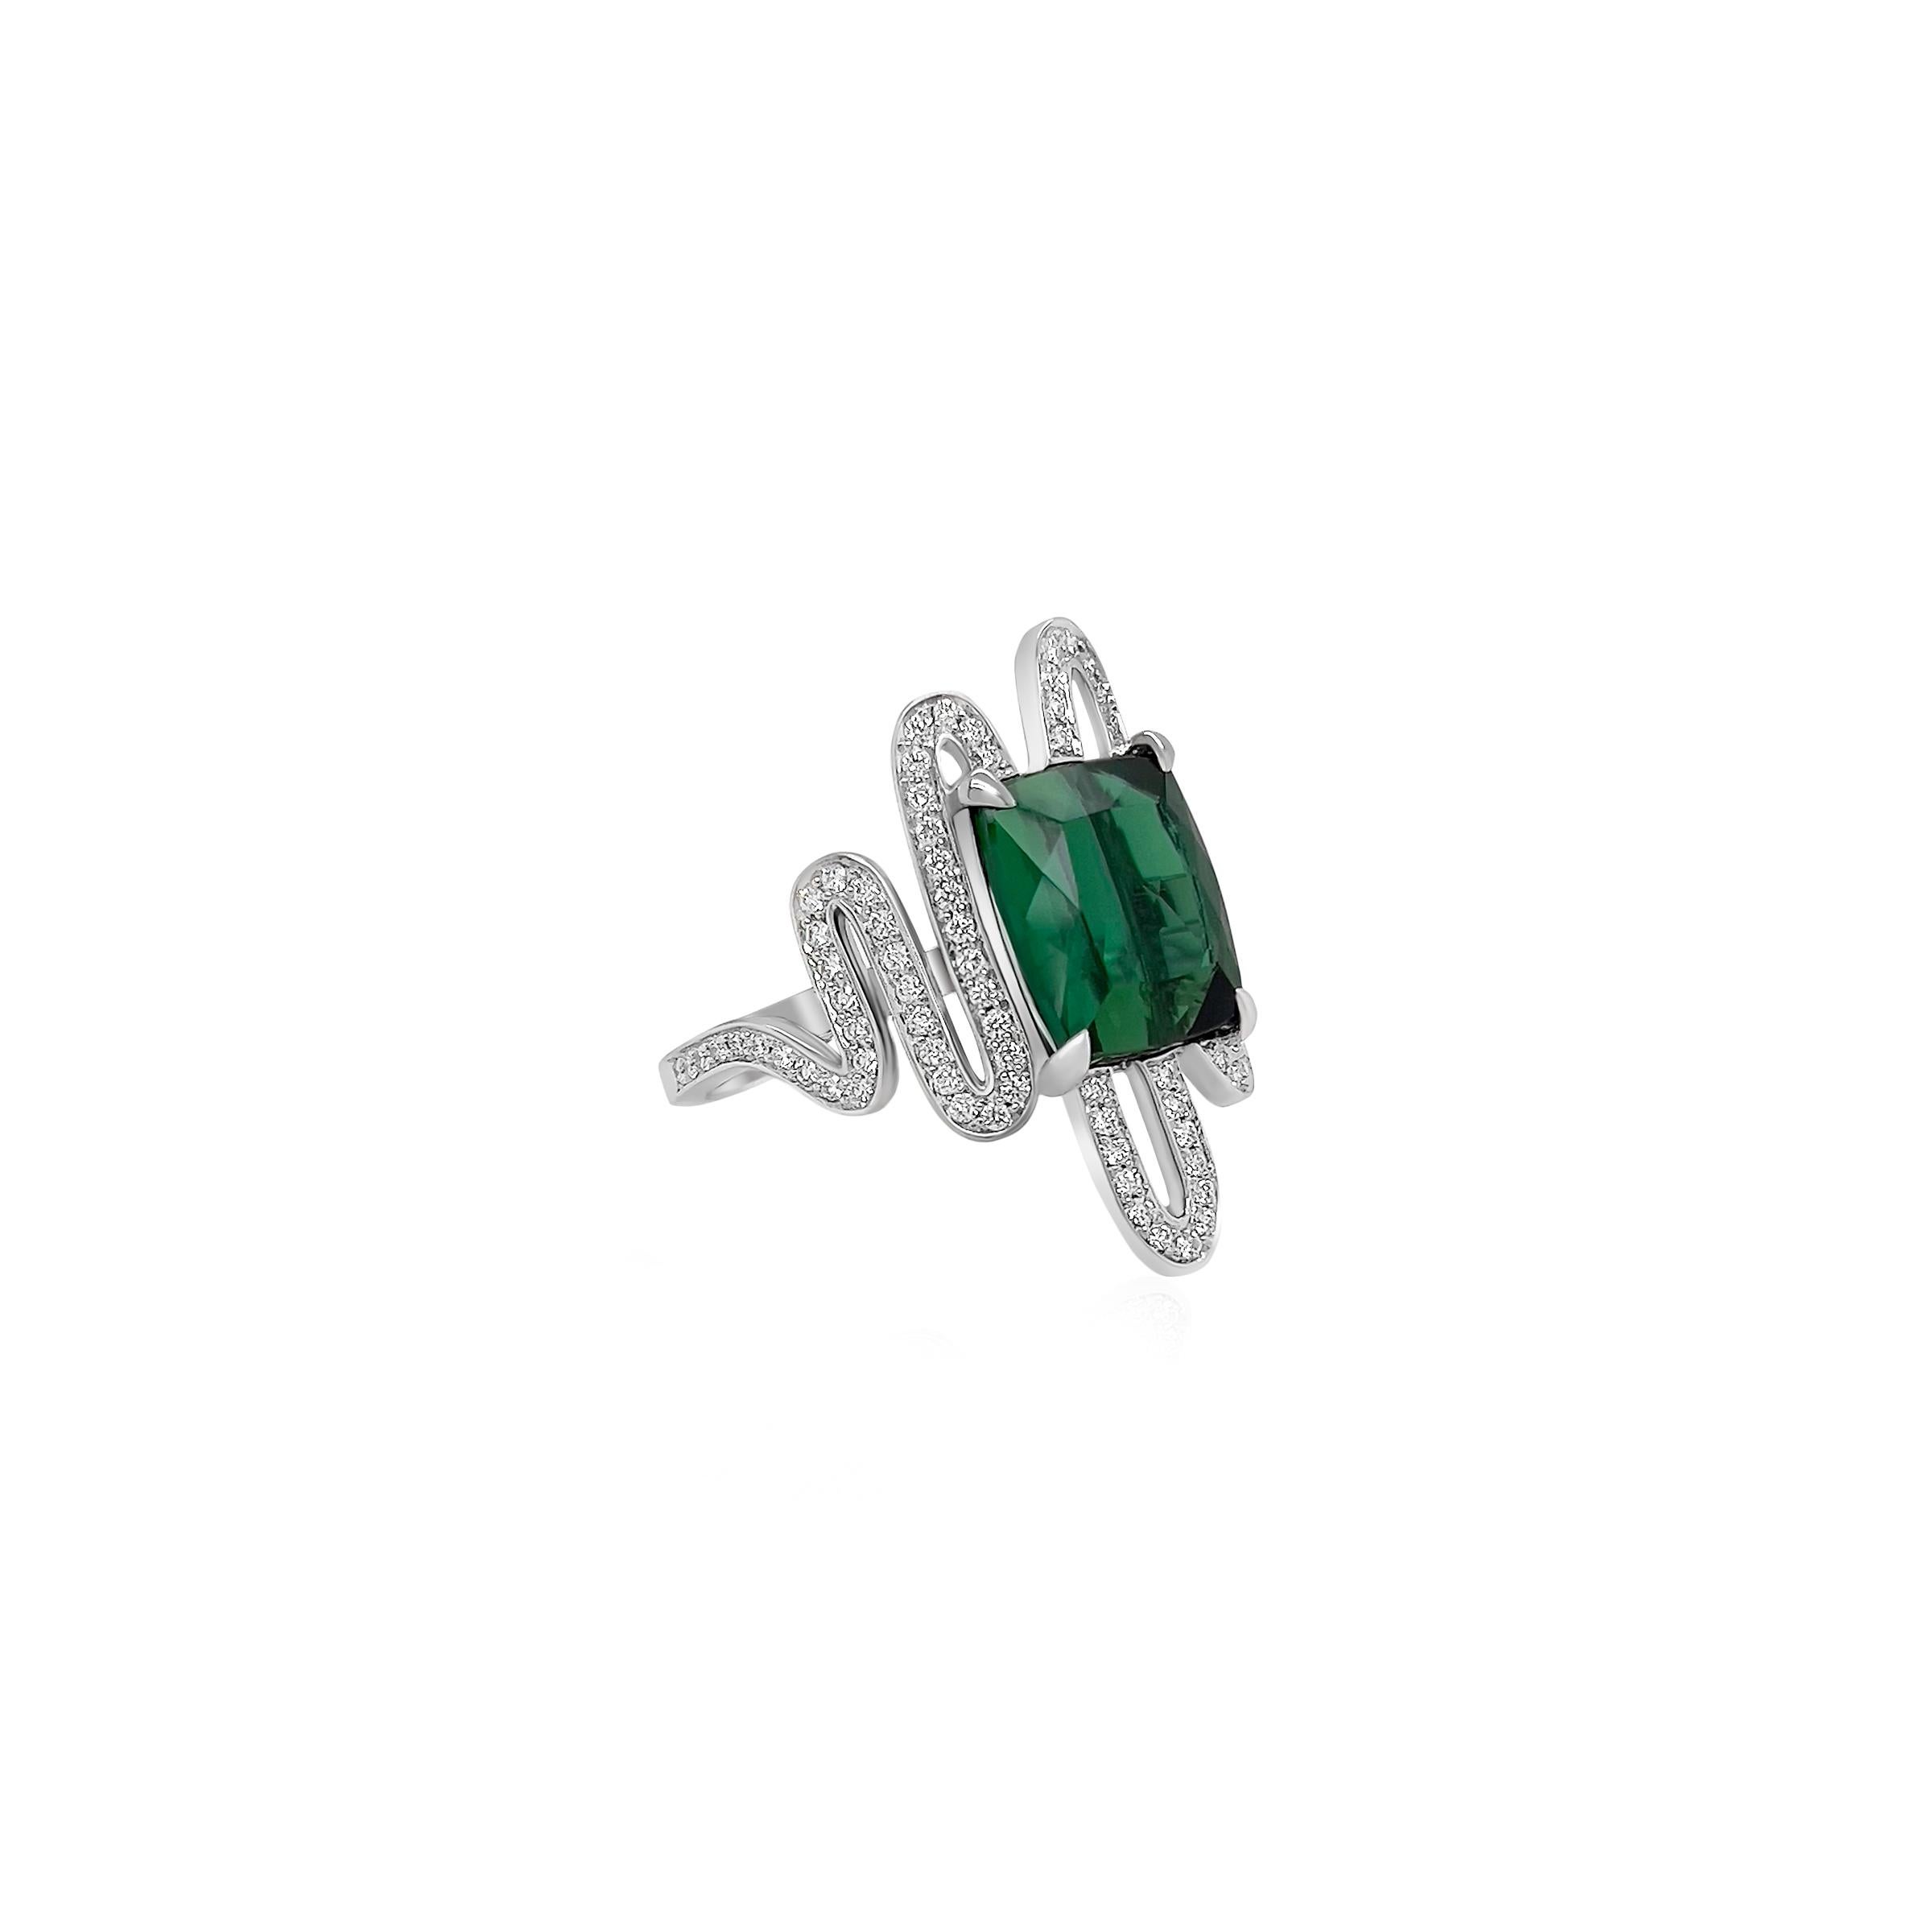 This rich green tourmaline from Brazil is a magnificent creation of nature. Crafted in luxurious 18k white gold this tourmaline ring is designed with a paved diamond spiral band, enhancing the vivid hues of the center stone. Each diamond is natural